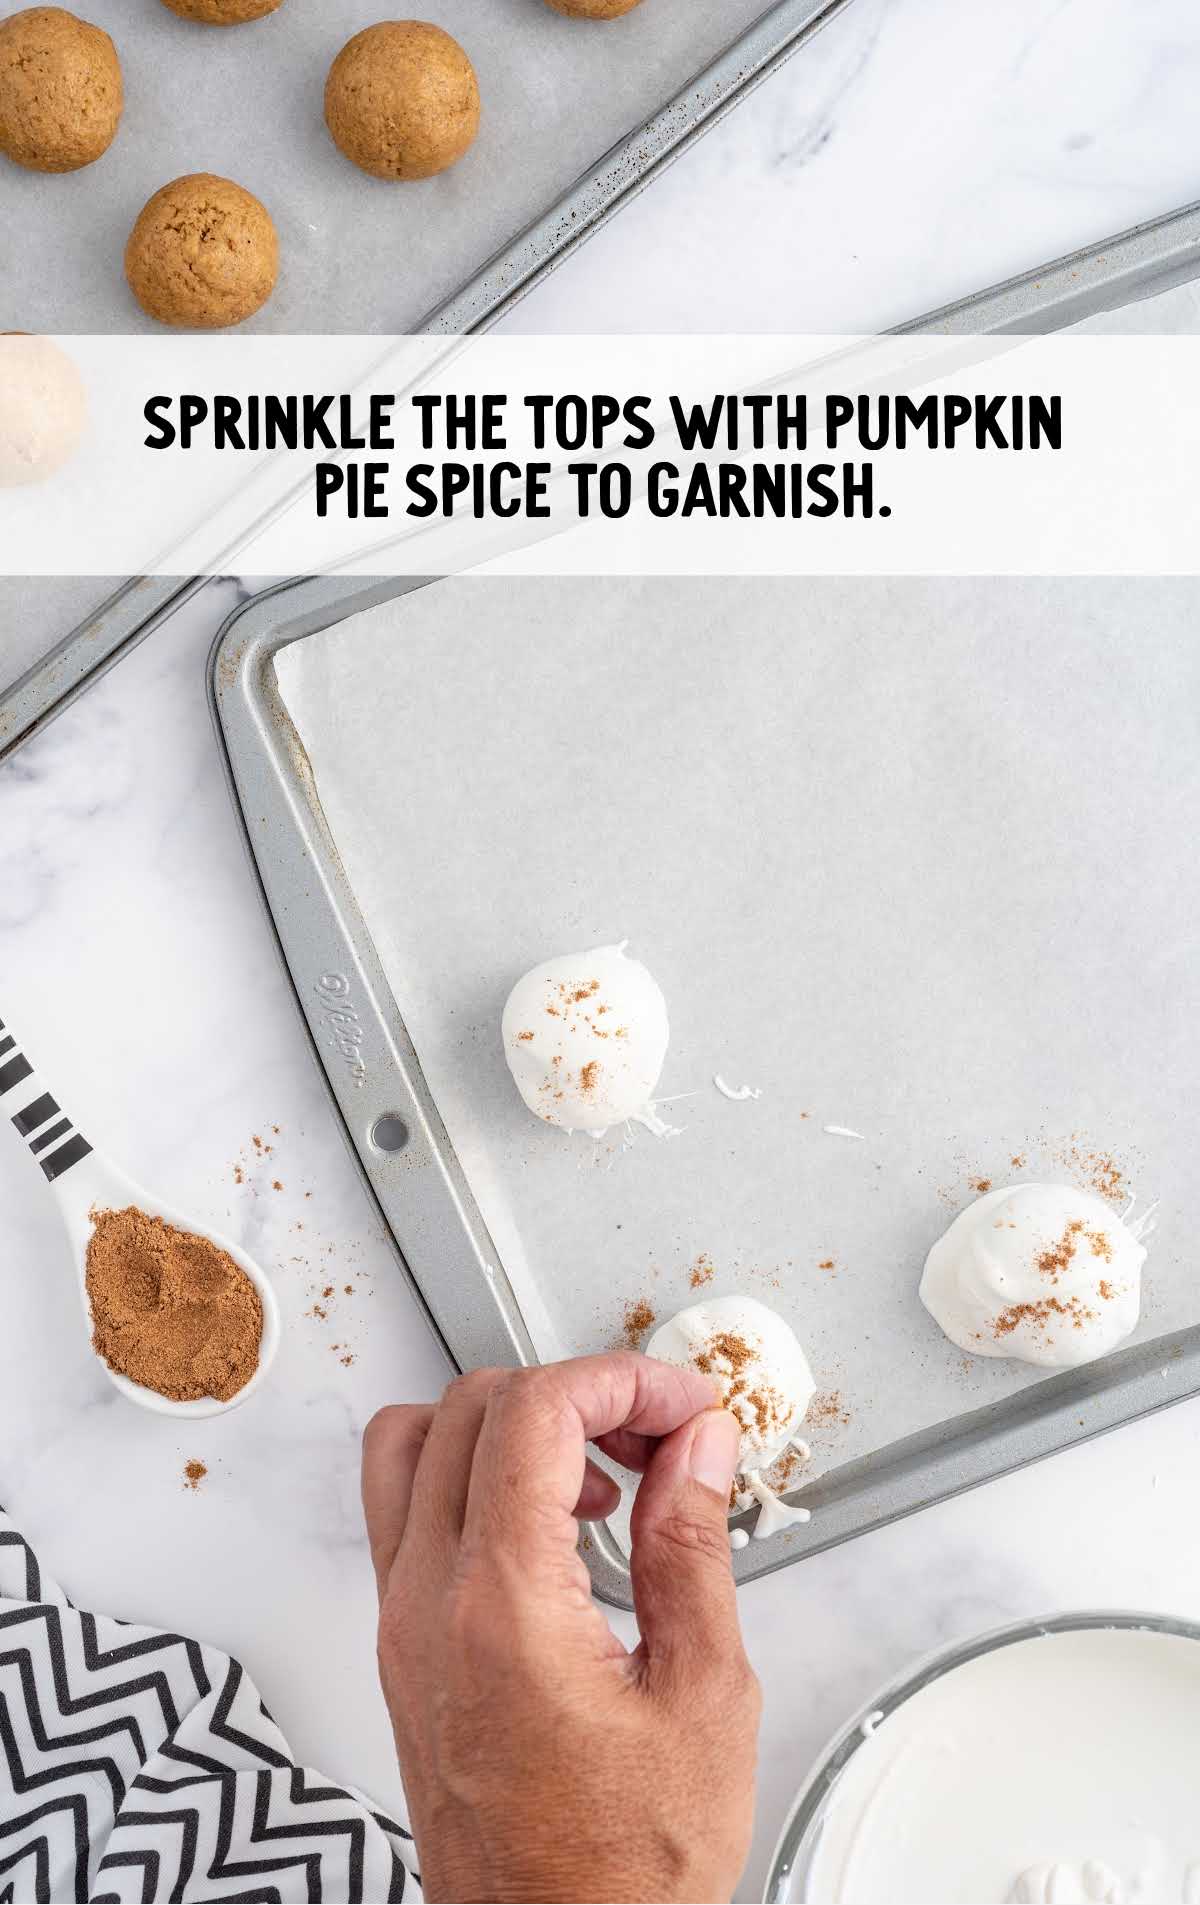 pumpkin pie spice sprinkled on top of the bites in a baking dish